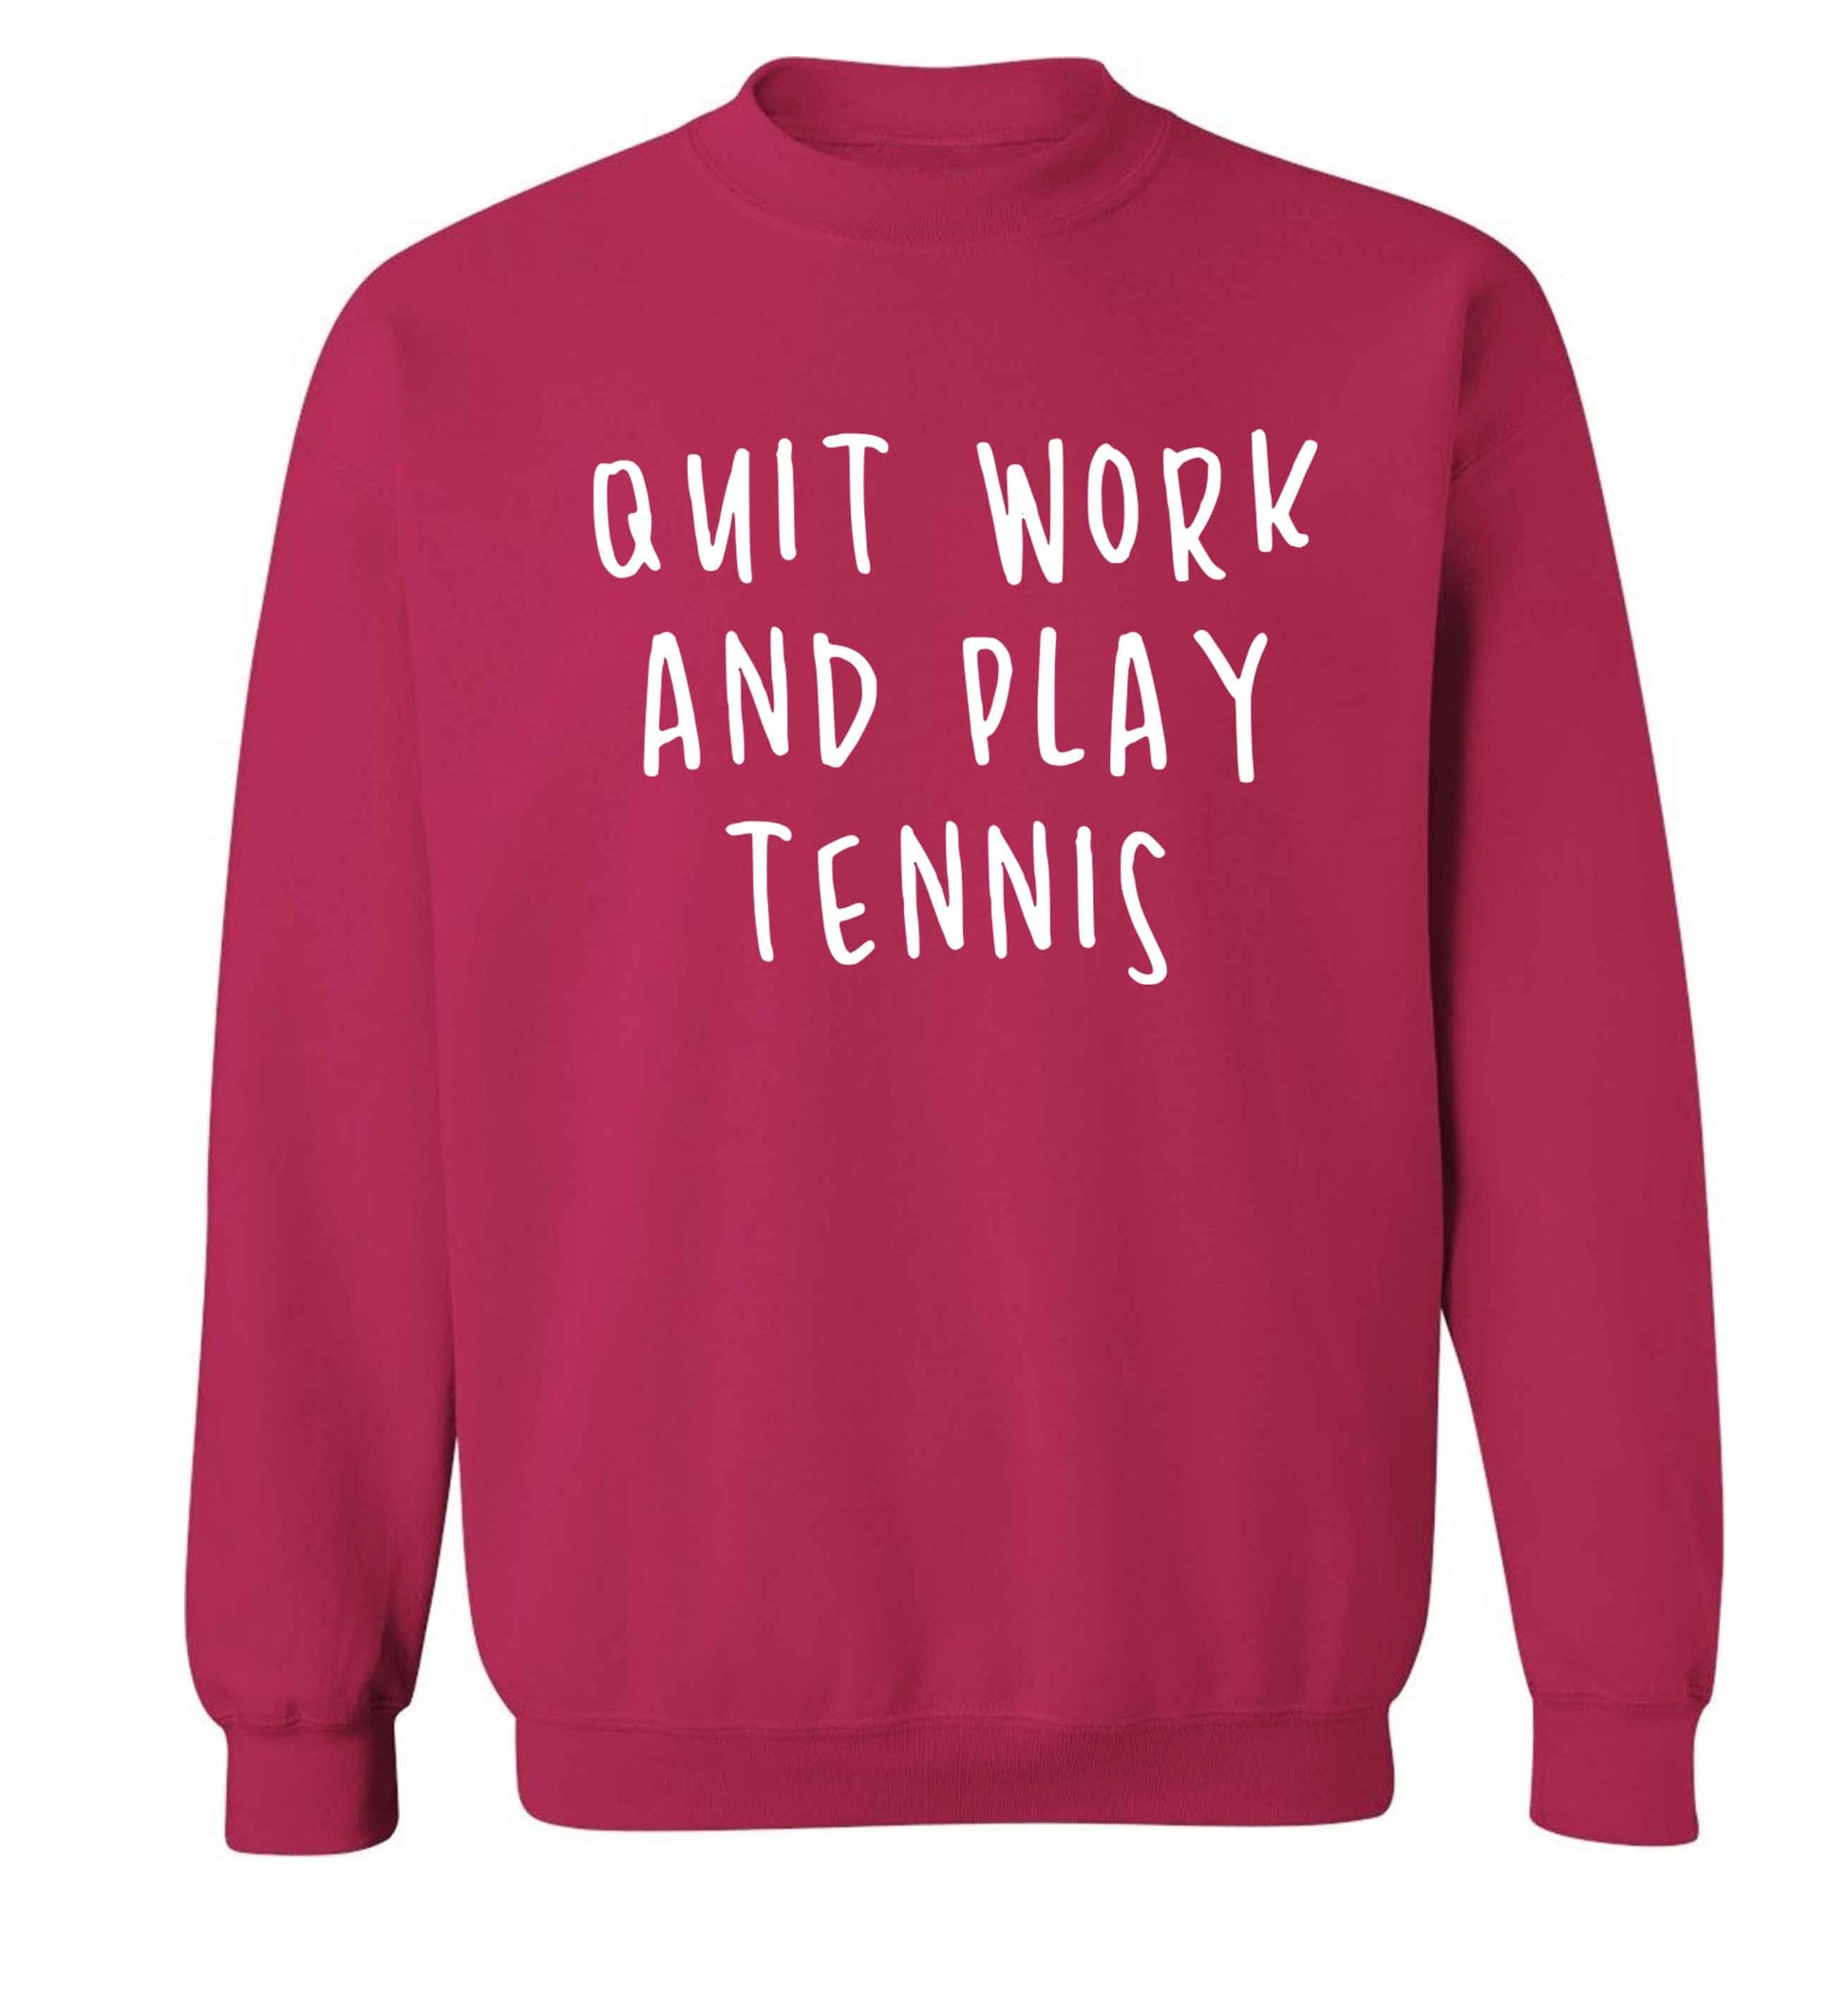 Quit work and play tennis Adult's unisex pink Sweater 2XL